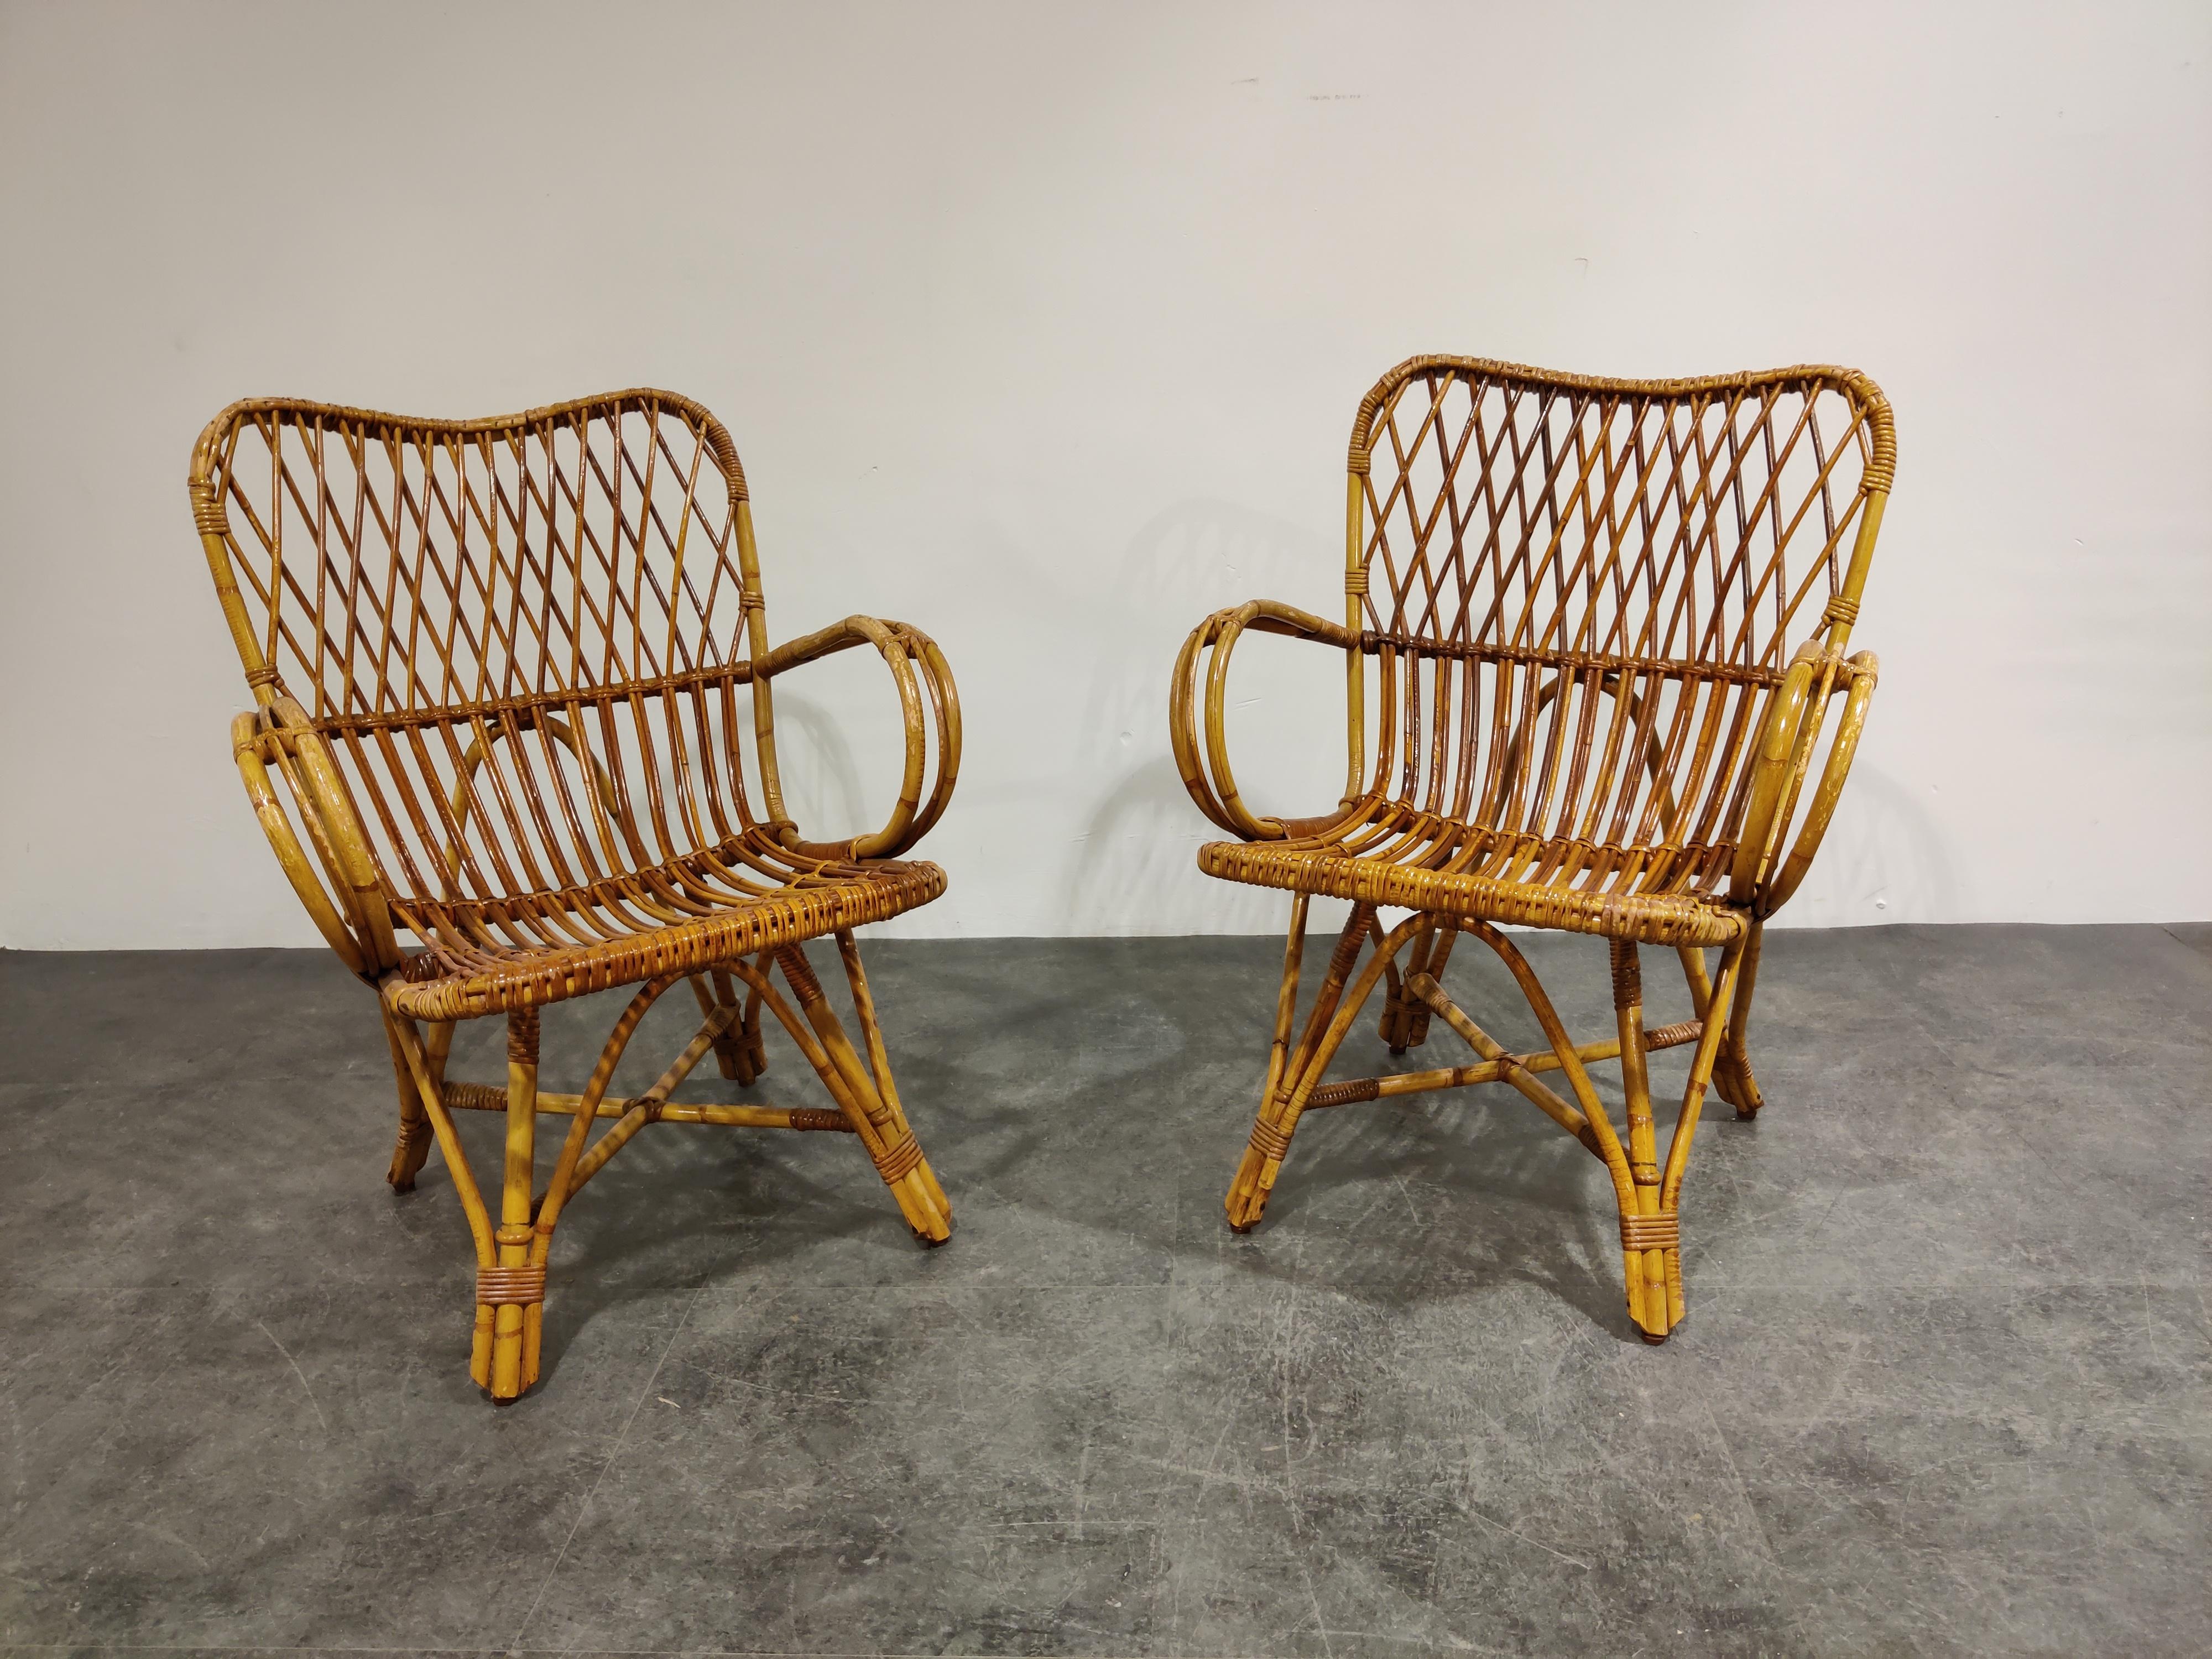 Elegant midcentury bamboo armchairs.

Timeless and decorative pieces.

Can be used both in-and outside.

Good condition.

1960s, Belgium

Measures: Height 84cm/33.07